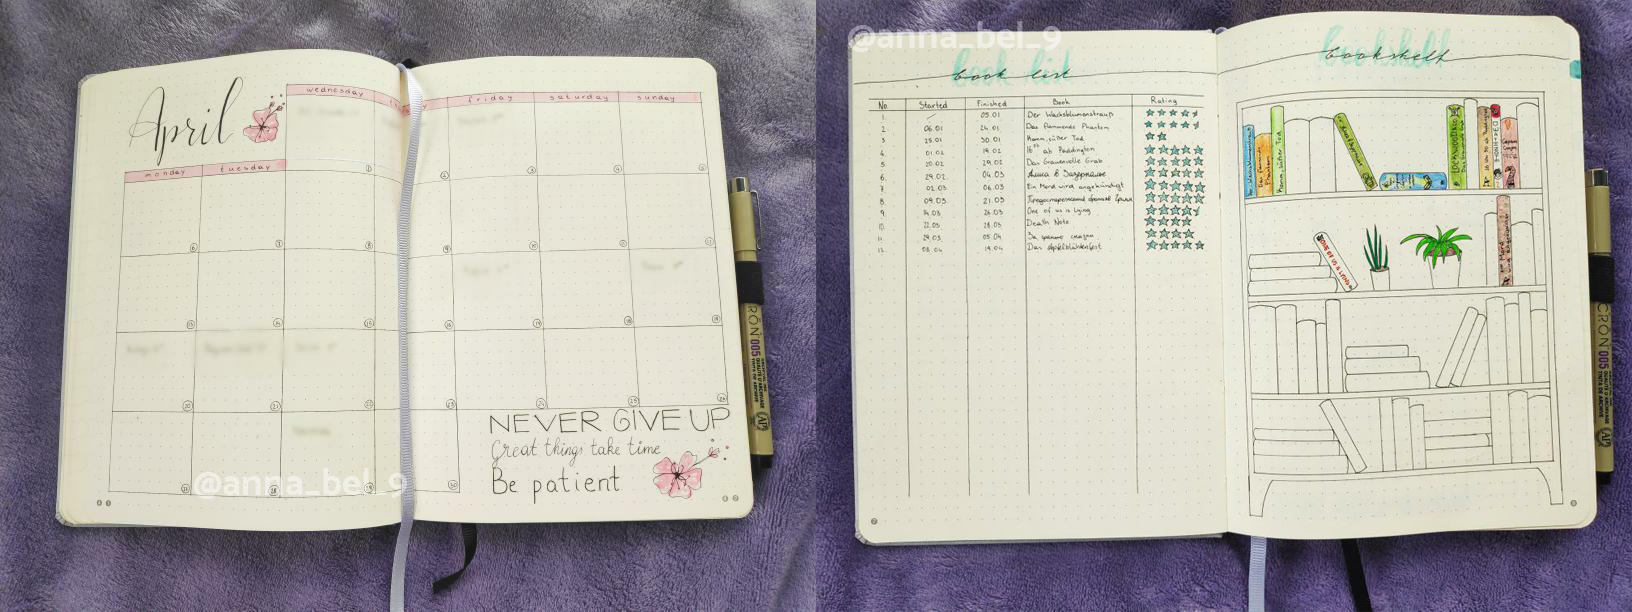 A really aesthetically pleasing and amazing Bullet Journal by @Anna_bel_9 on Instagram